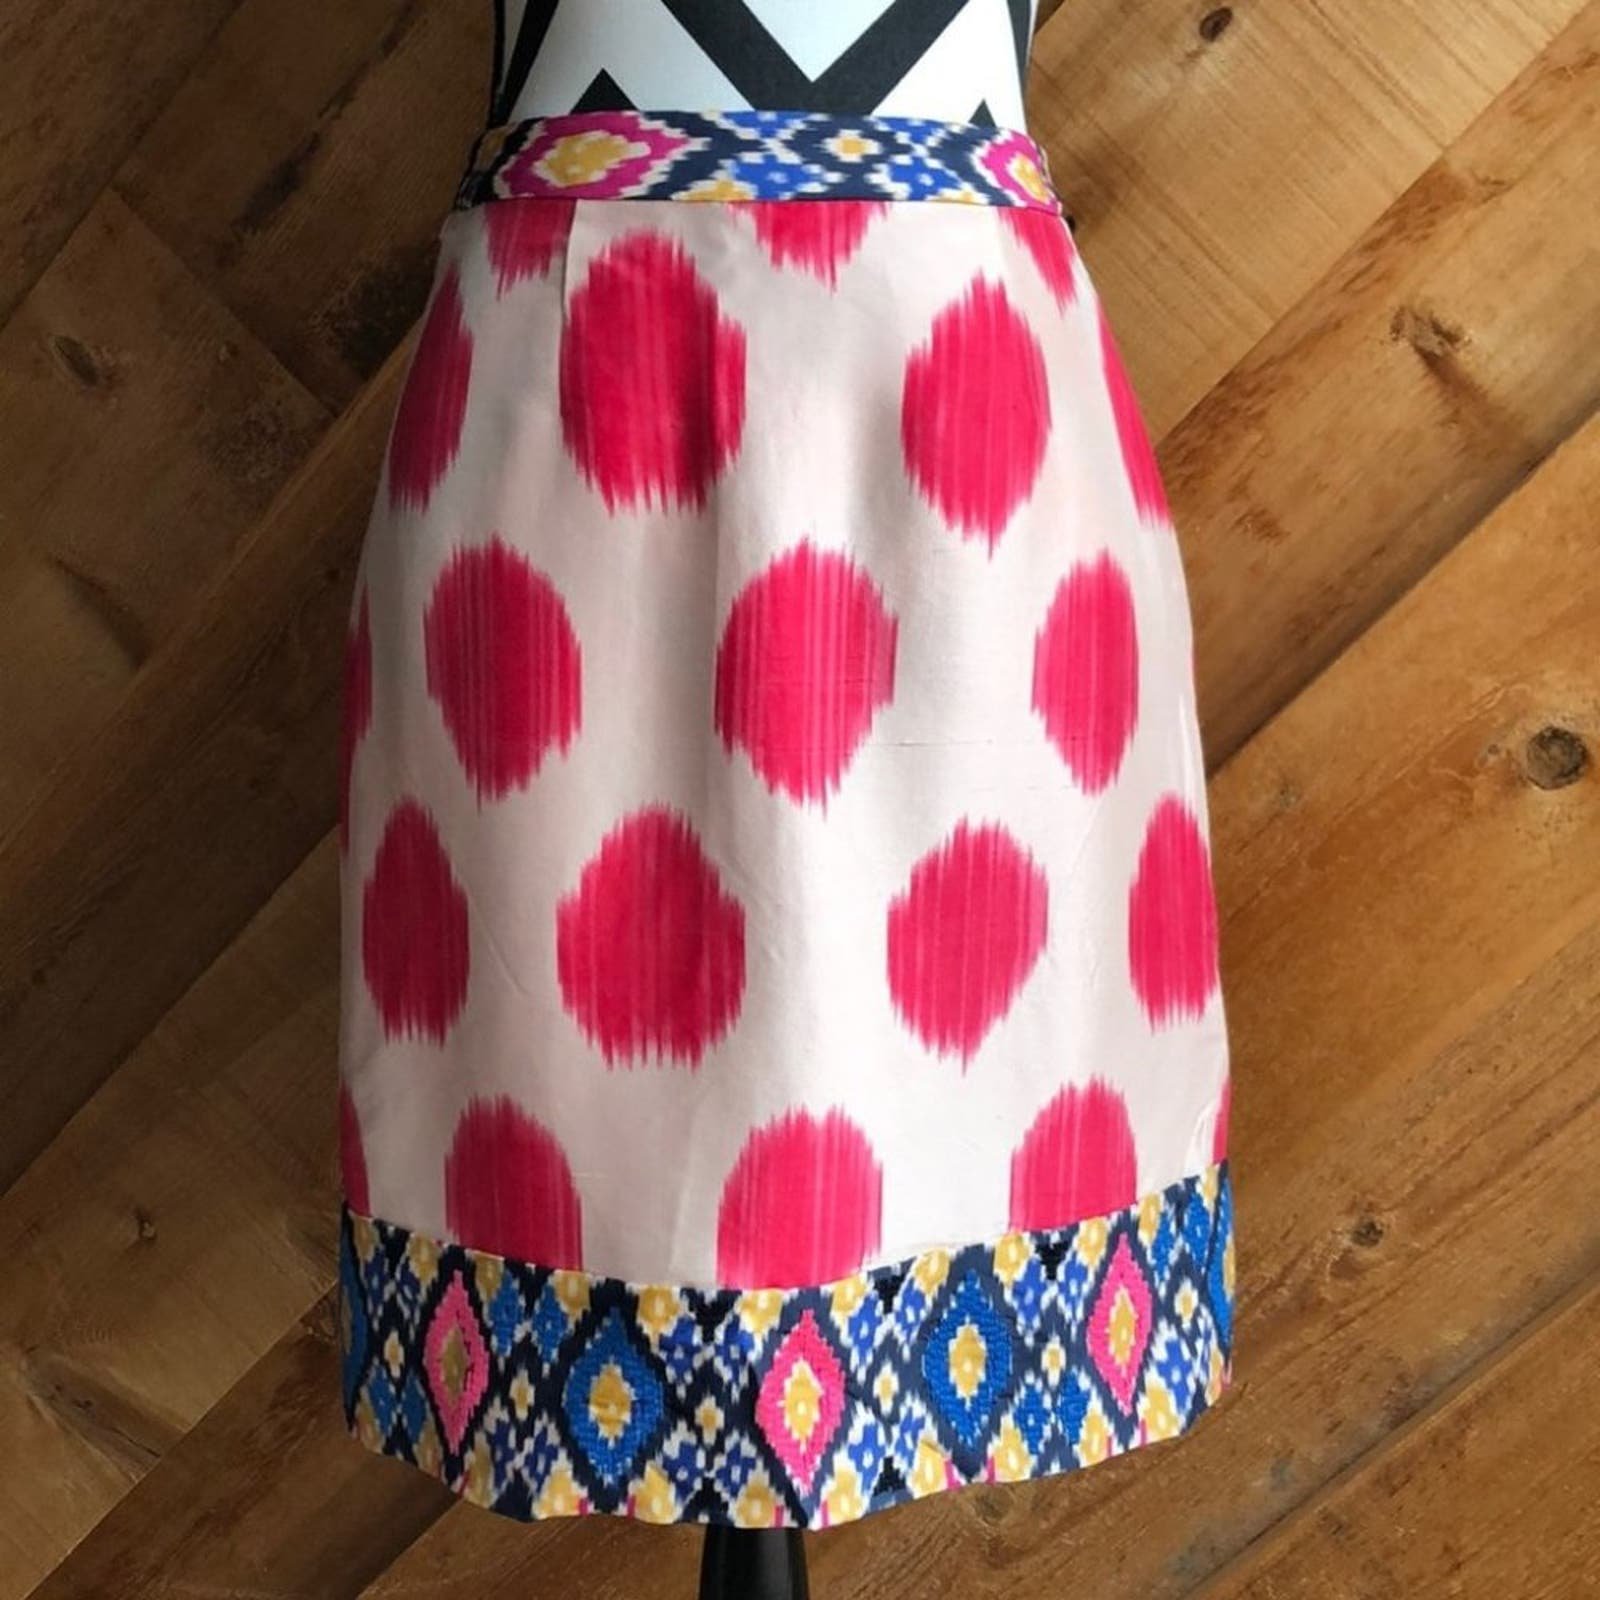 high discount Maeve Anthropologie Pink Polka Dot Skirt Silk Size Small KQVOem30f Everyday Low Prices